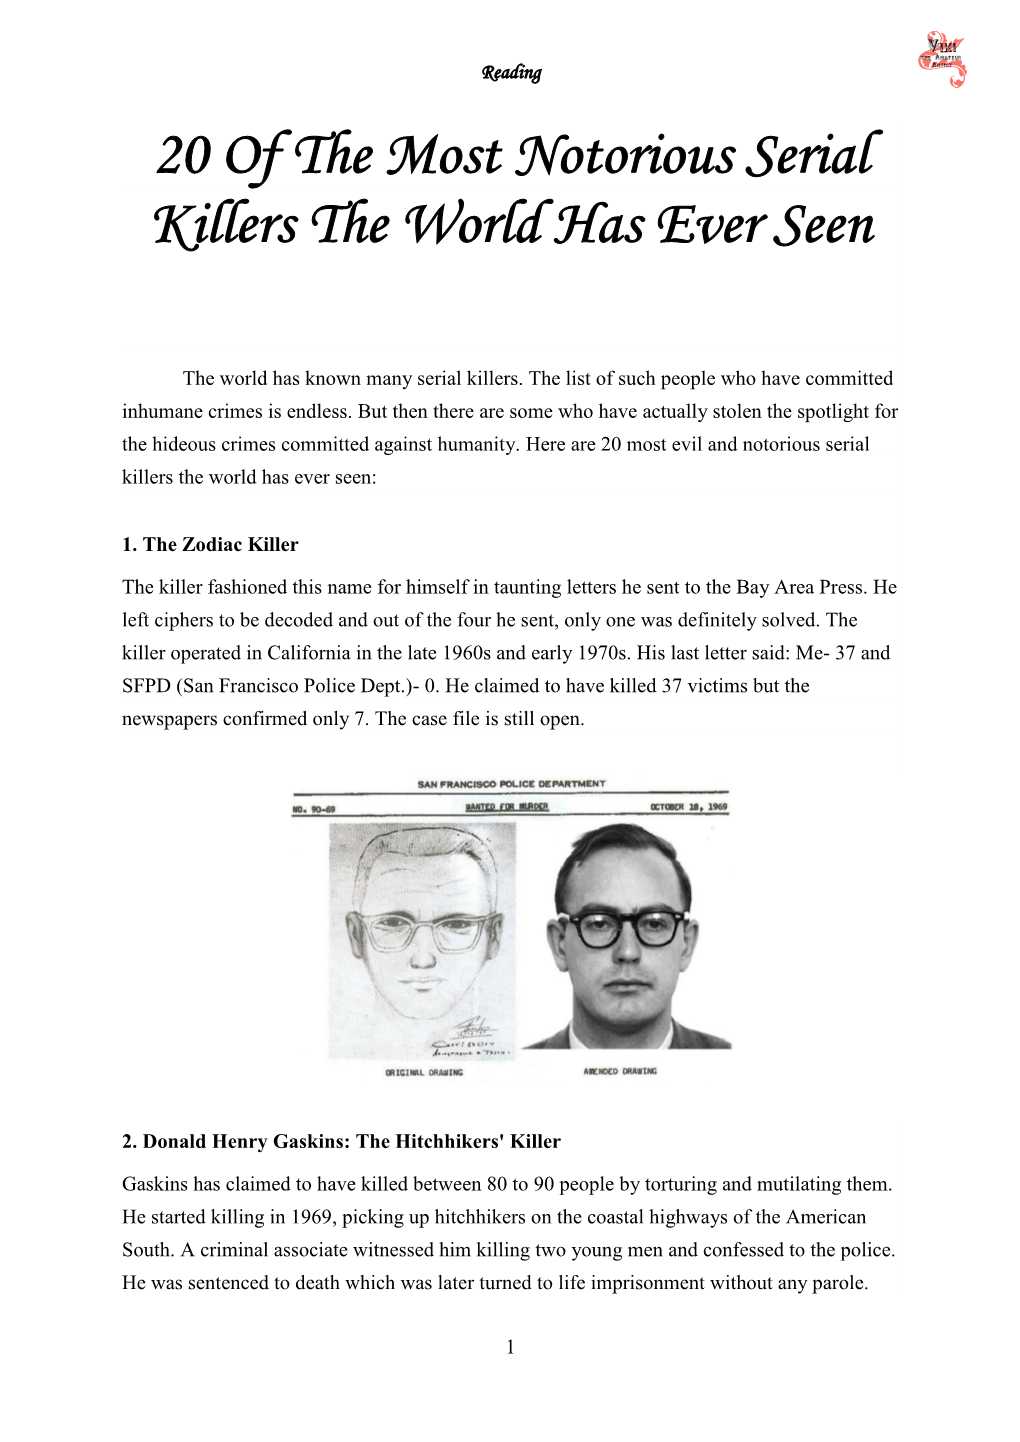 20 of the Most Notorious Serial Killers the World Has Ever Seen